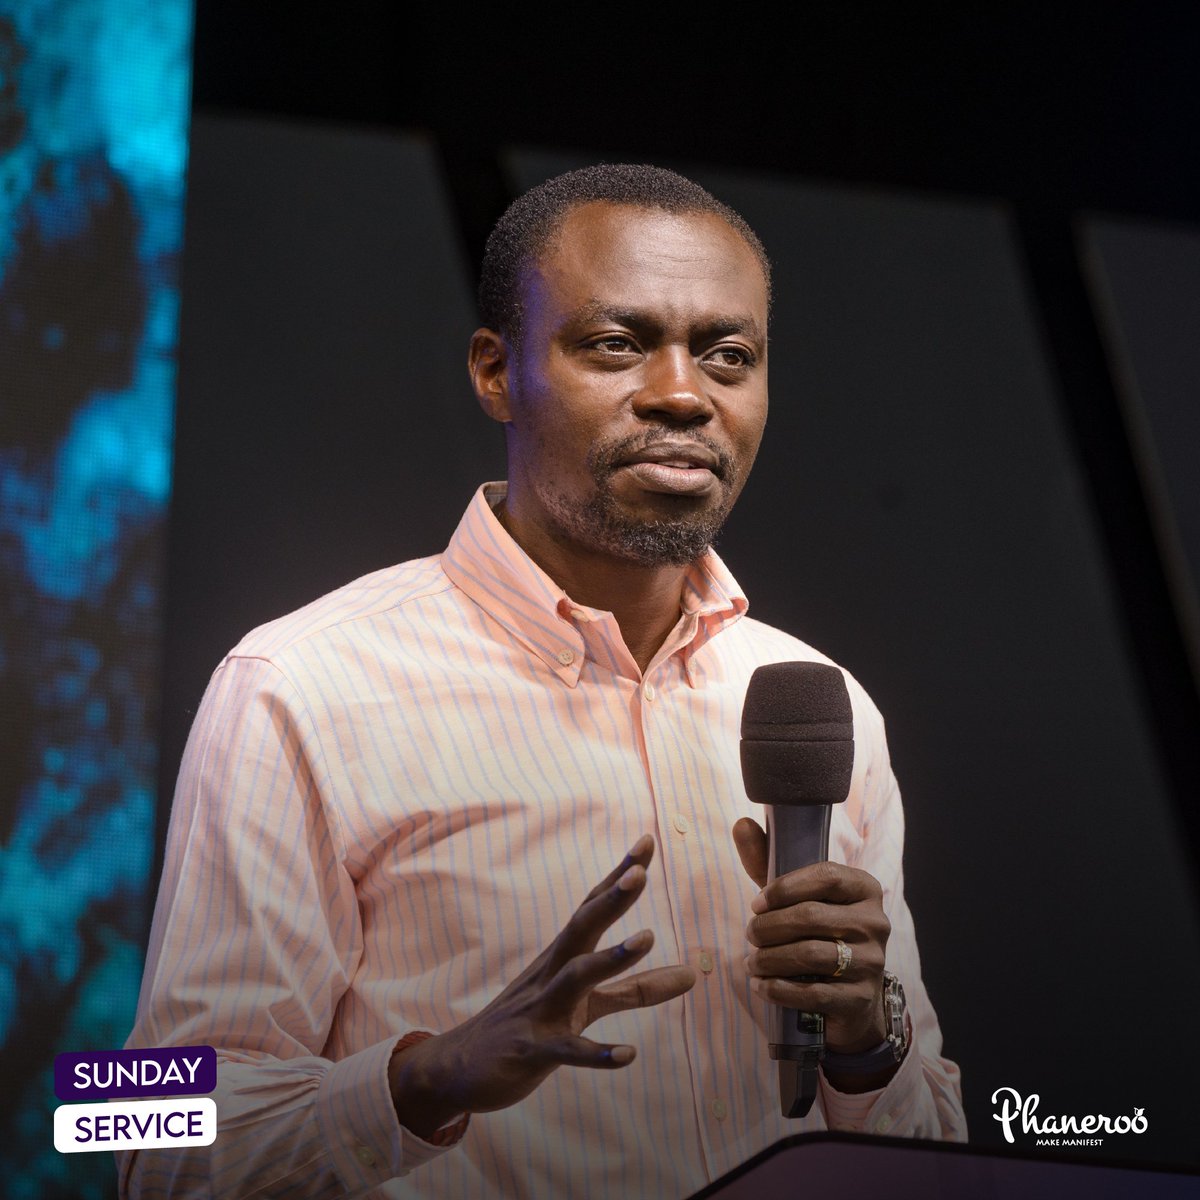 Our life of prayer, communion with God and fasting should be born out of the relationship we have with God. It should not be prompted by crises and trouble. bit.ly/PhanerooSunday… #PhanerooSundayService #LiveNow